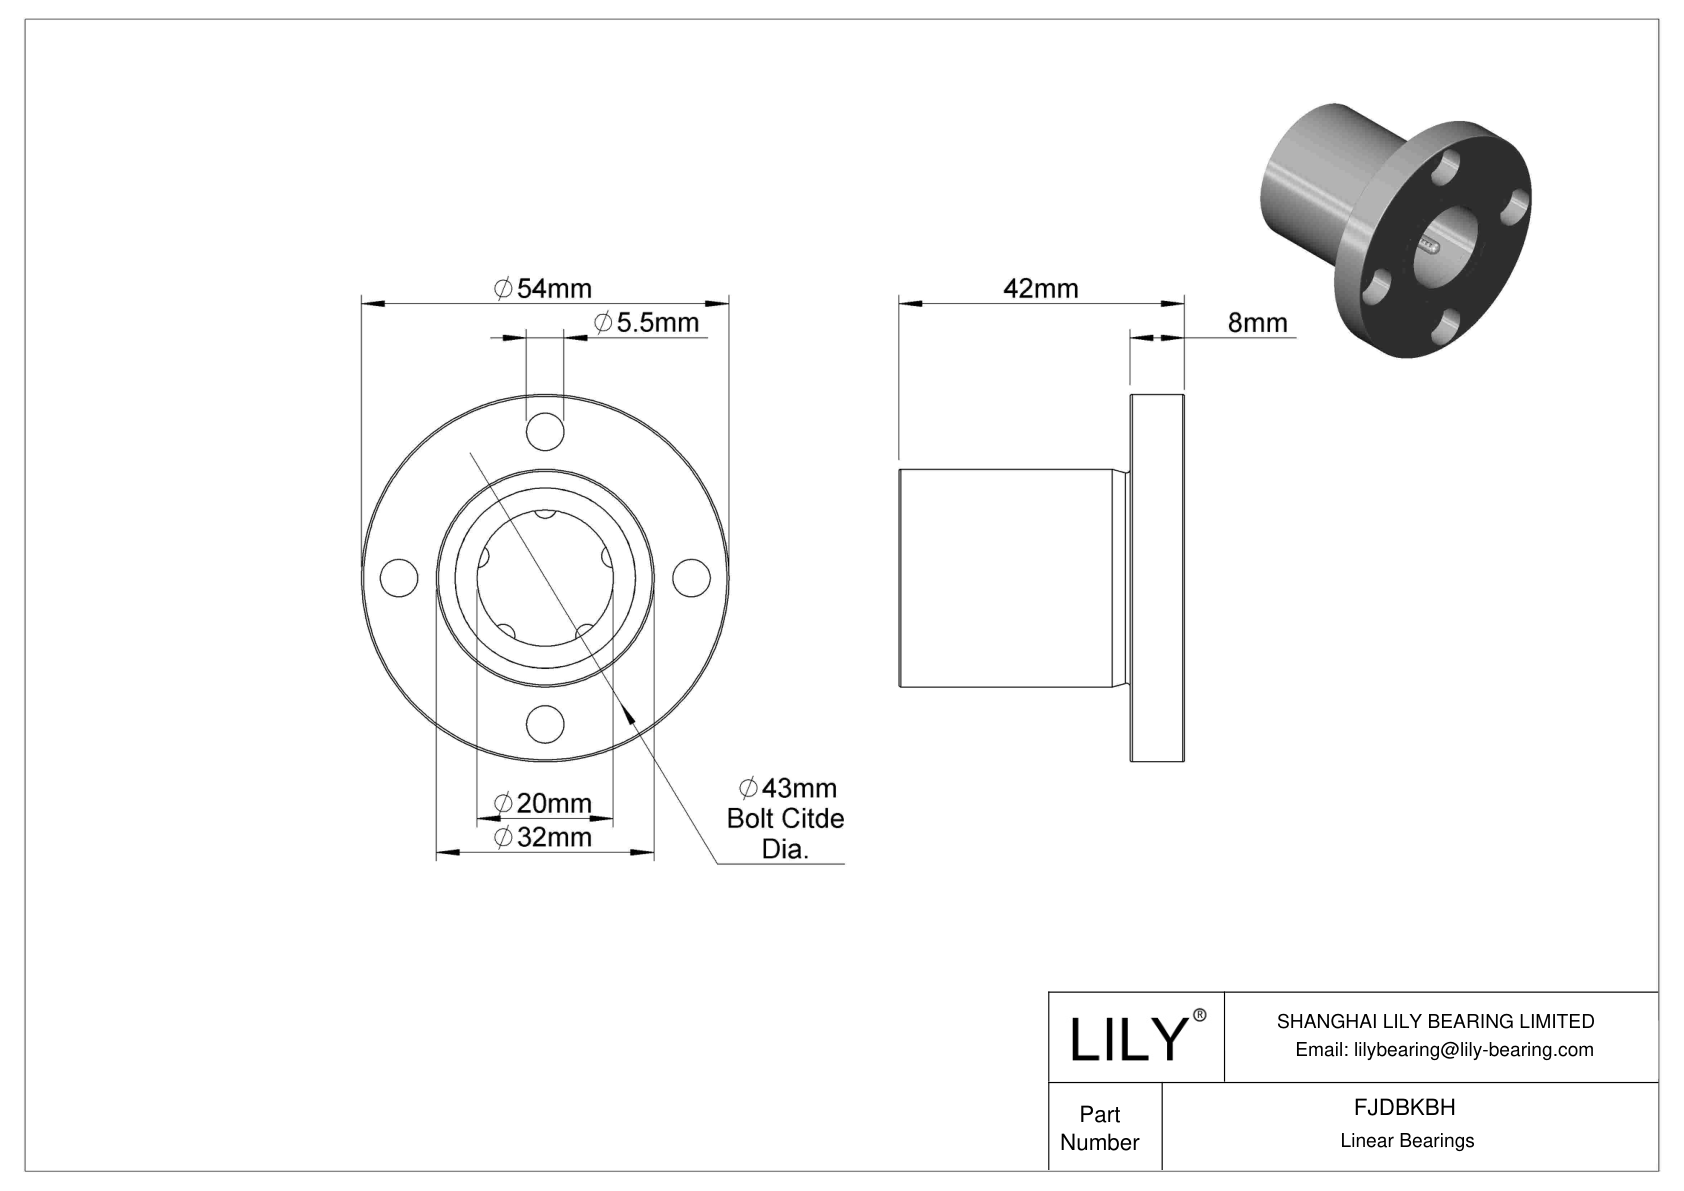 FJDBKBH Corrosion-Resistant Flange-Mounted Linear Ball Bearings cad drawing